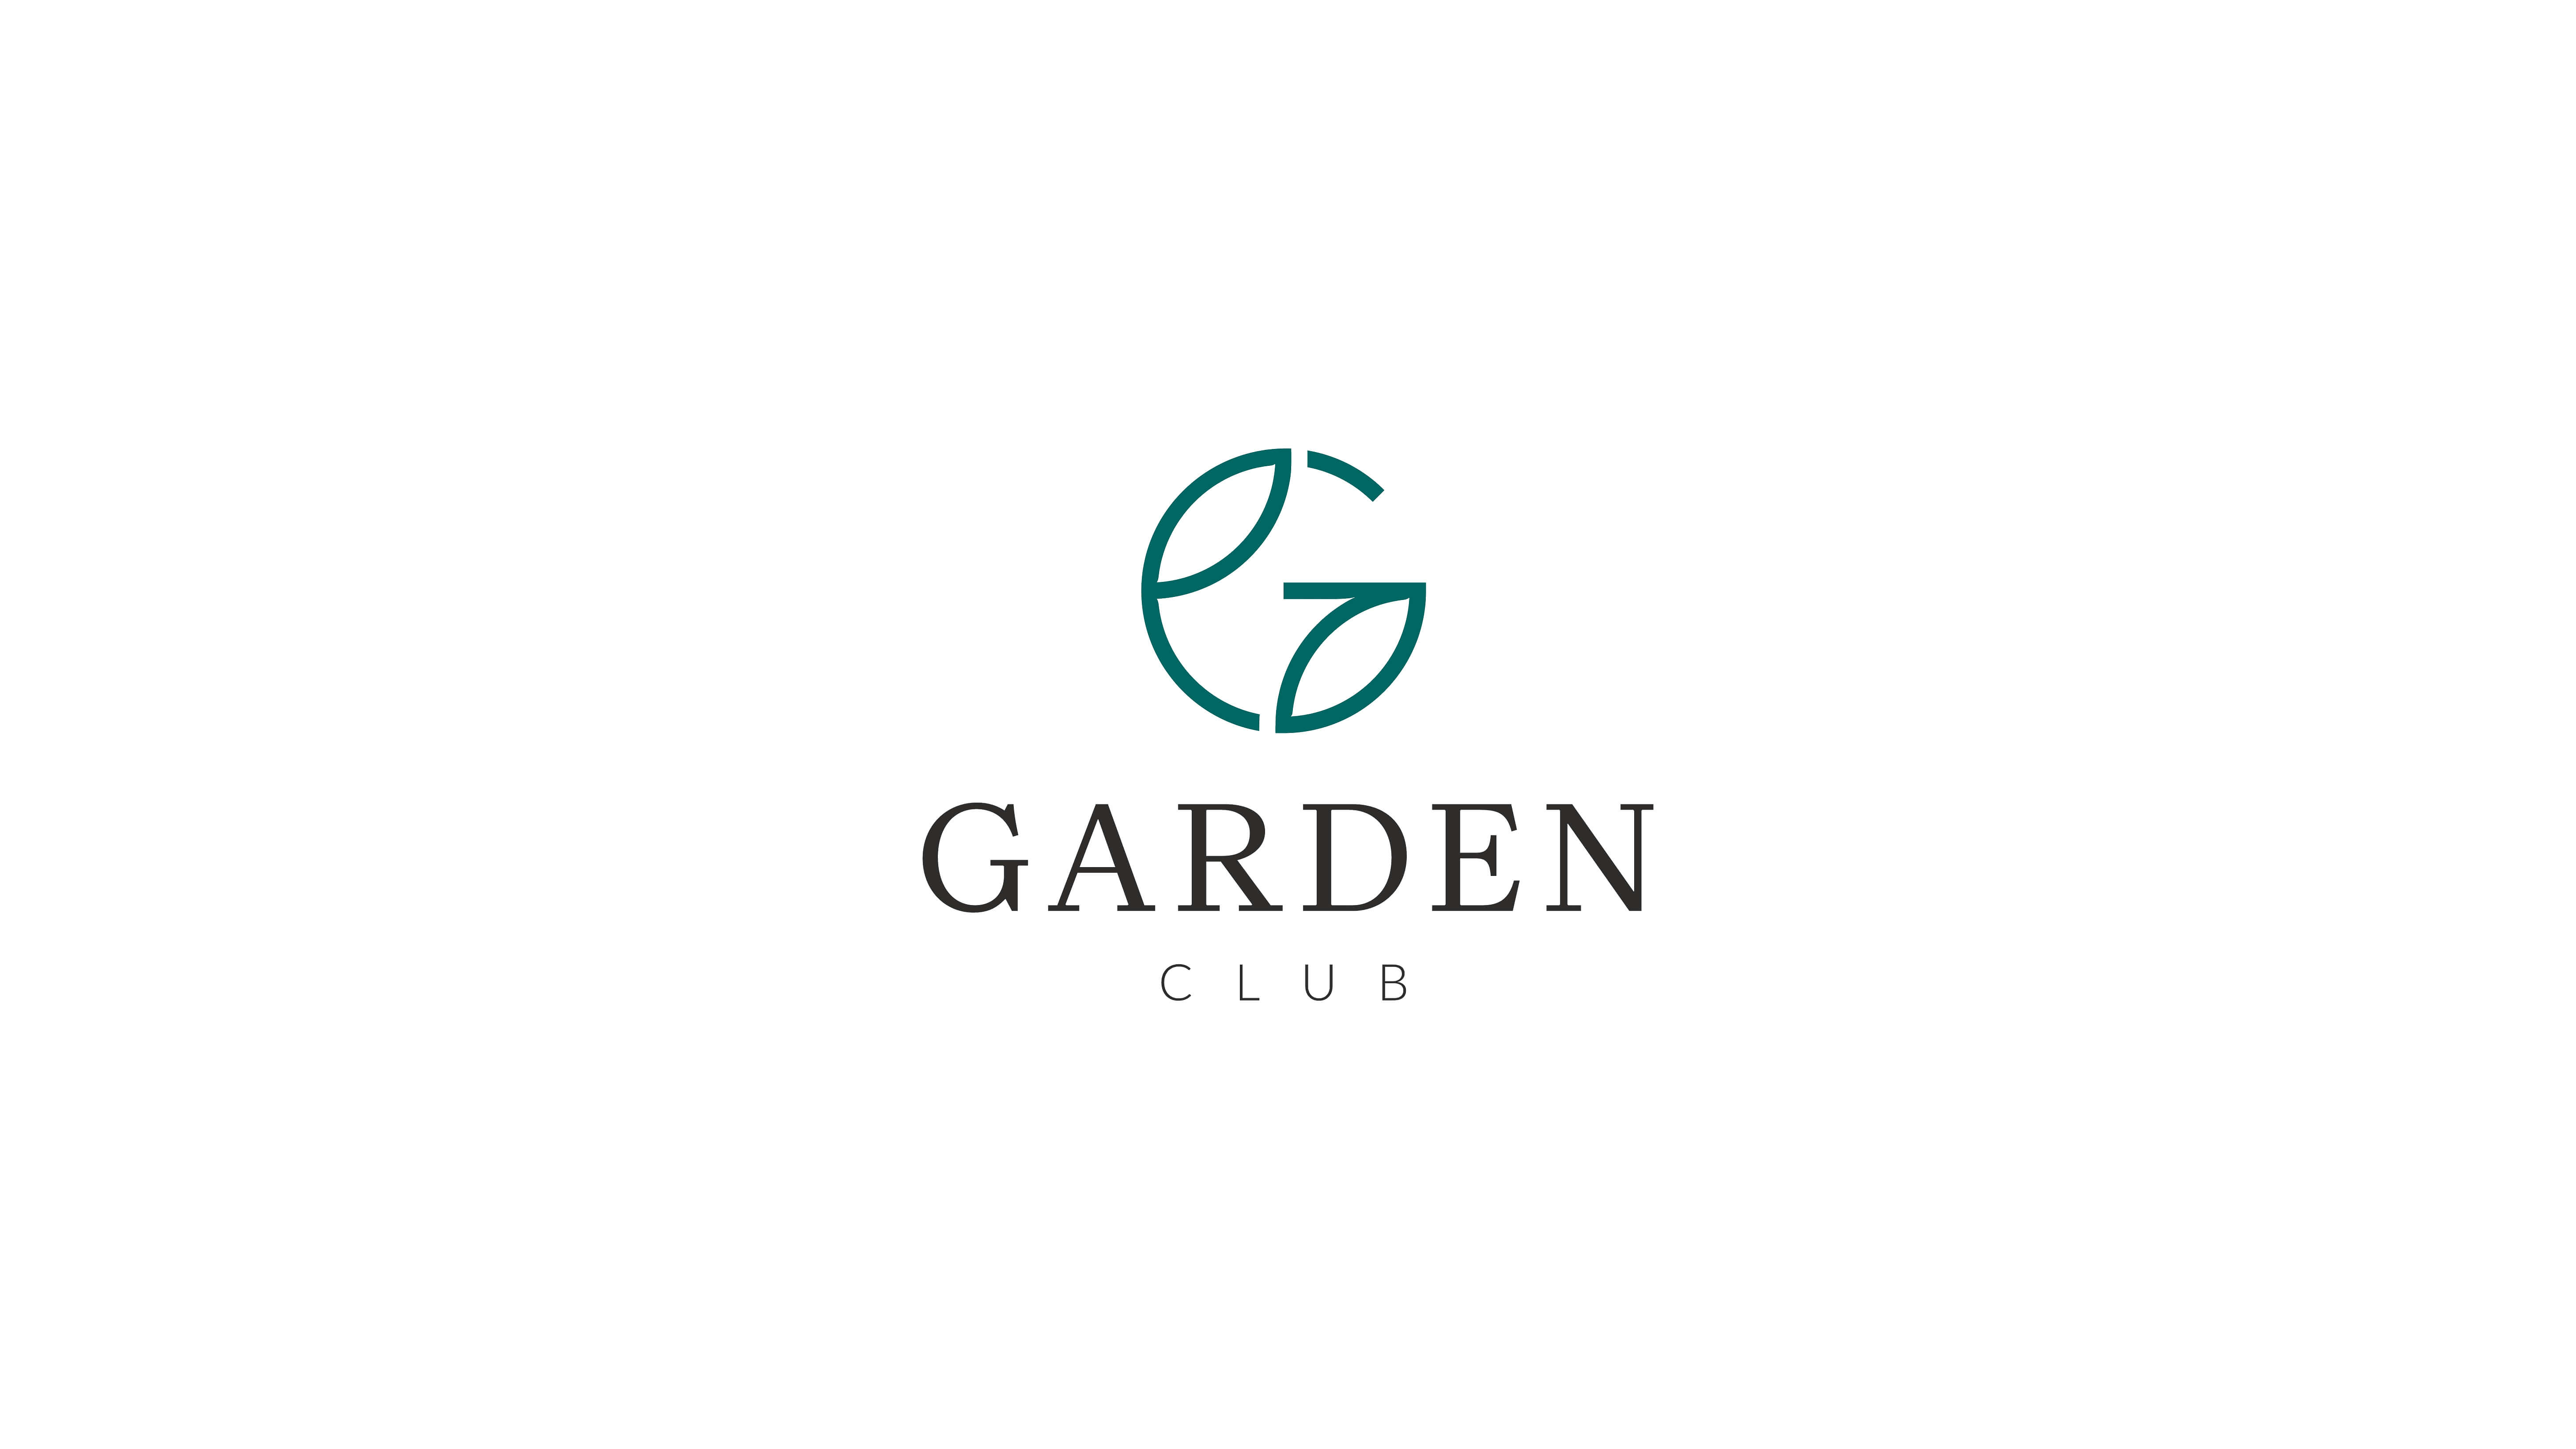 Garden Club Sports and Health Strategy and Branding - World Brand Design  Society